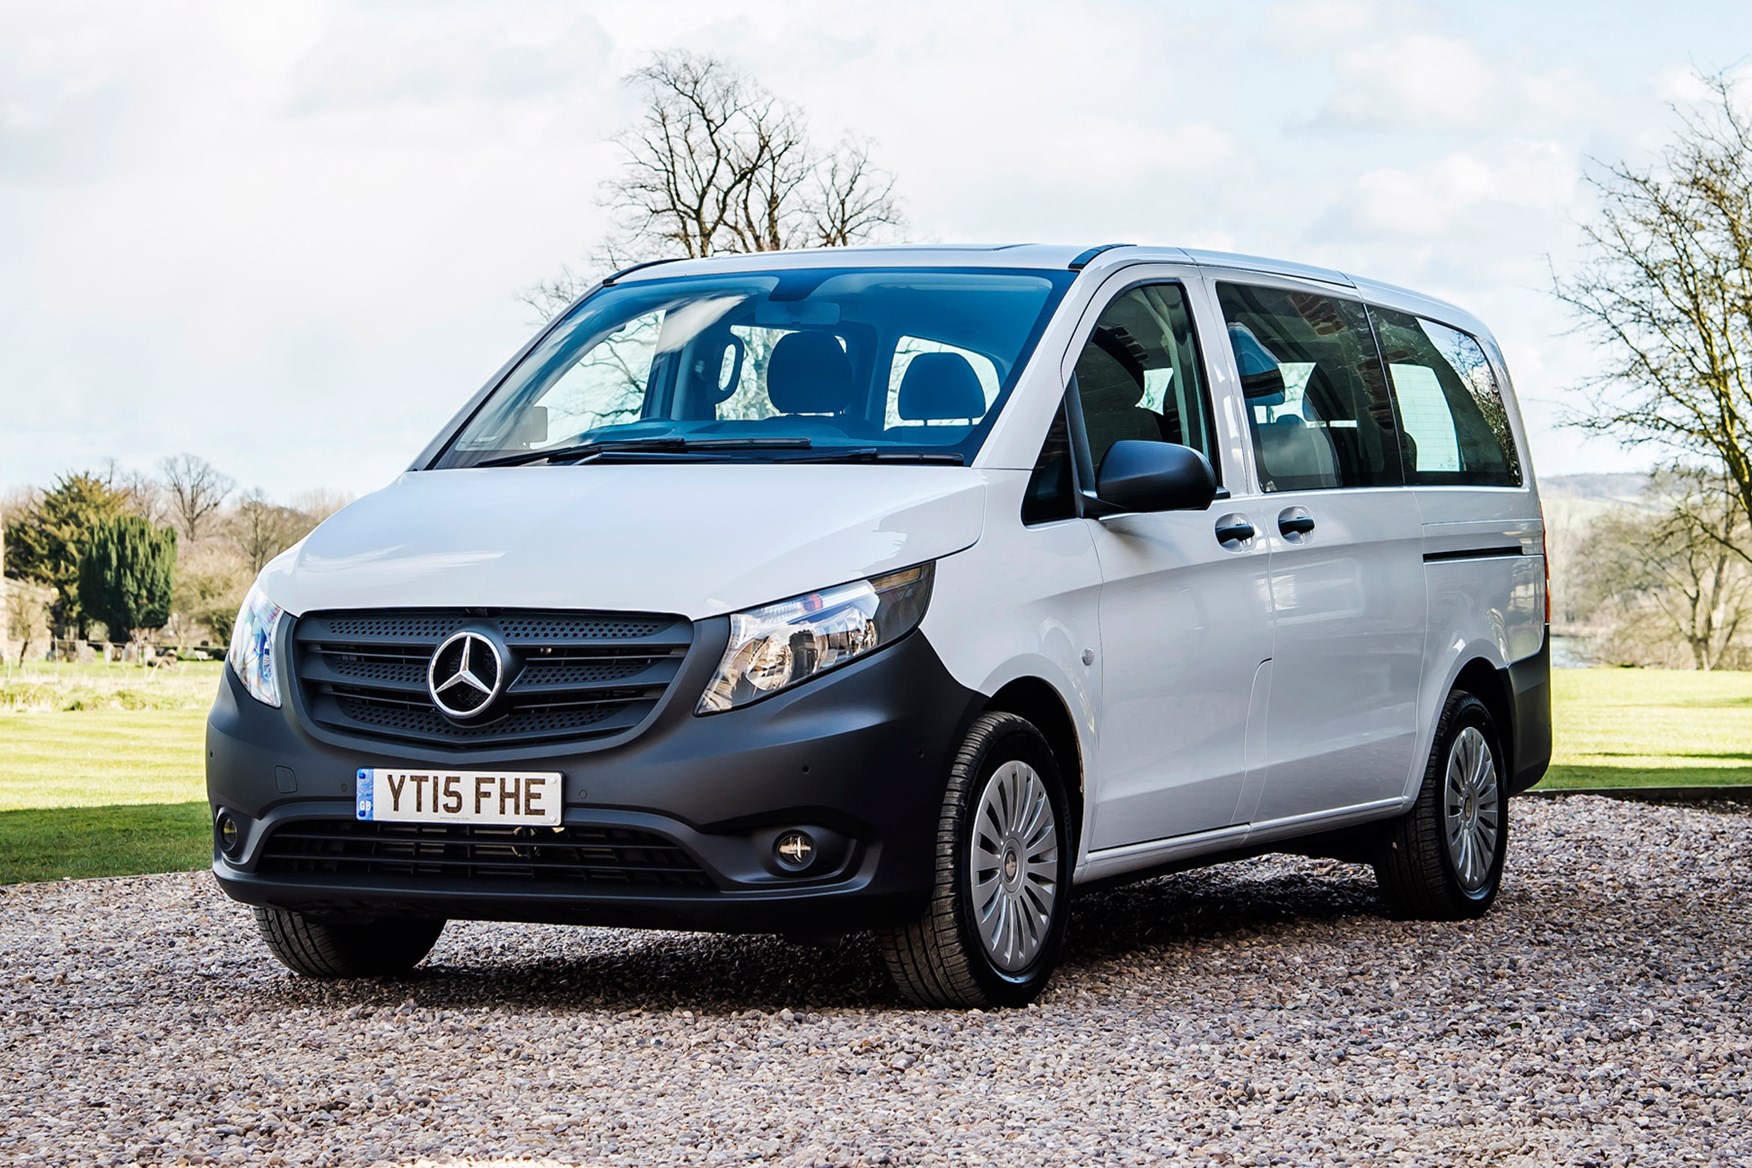 Mercedes-Benz Vito full review on Parkers Vans - front exterior